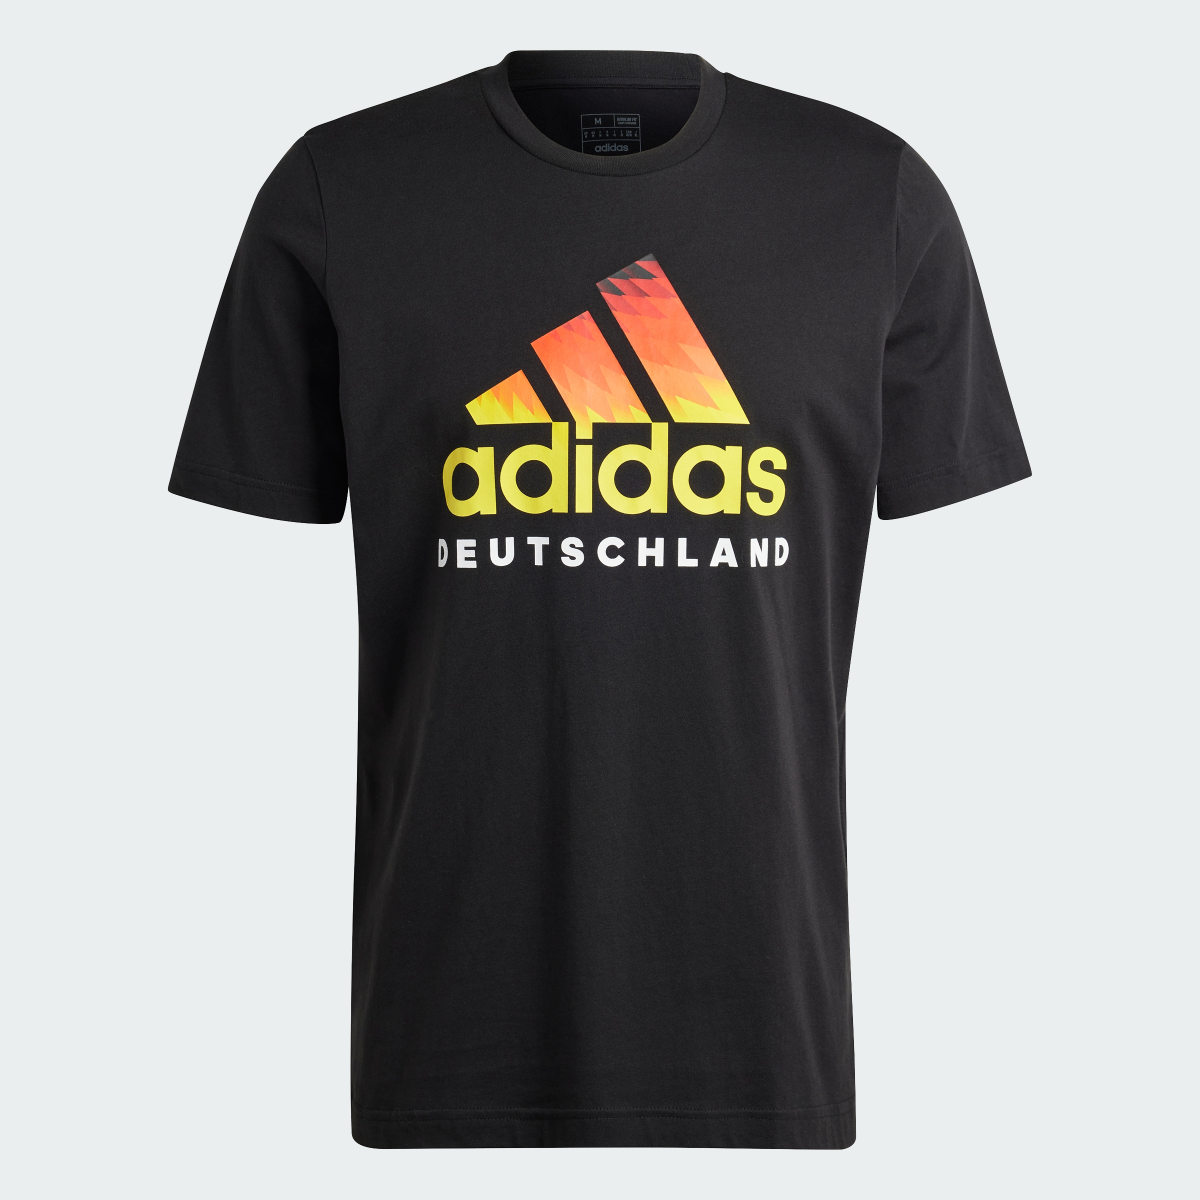 Adidas Germany DNA Graphic T-Shirt. 4